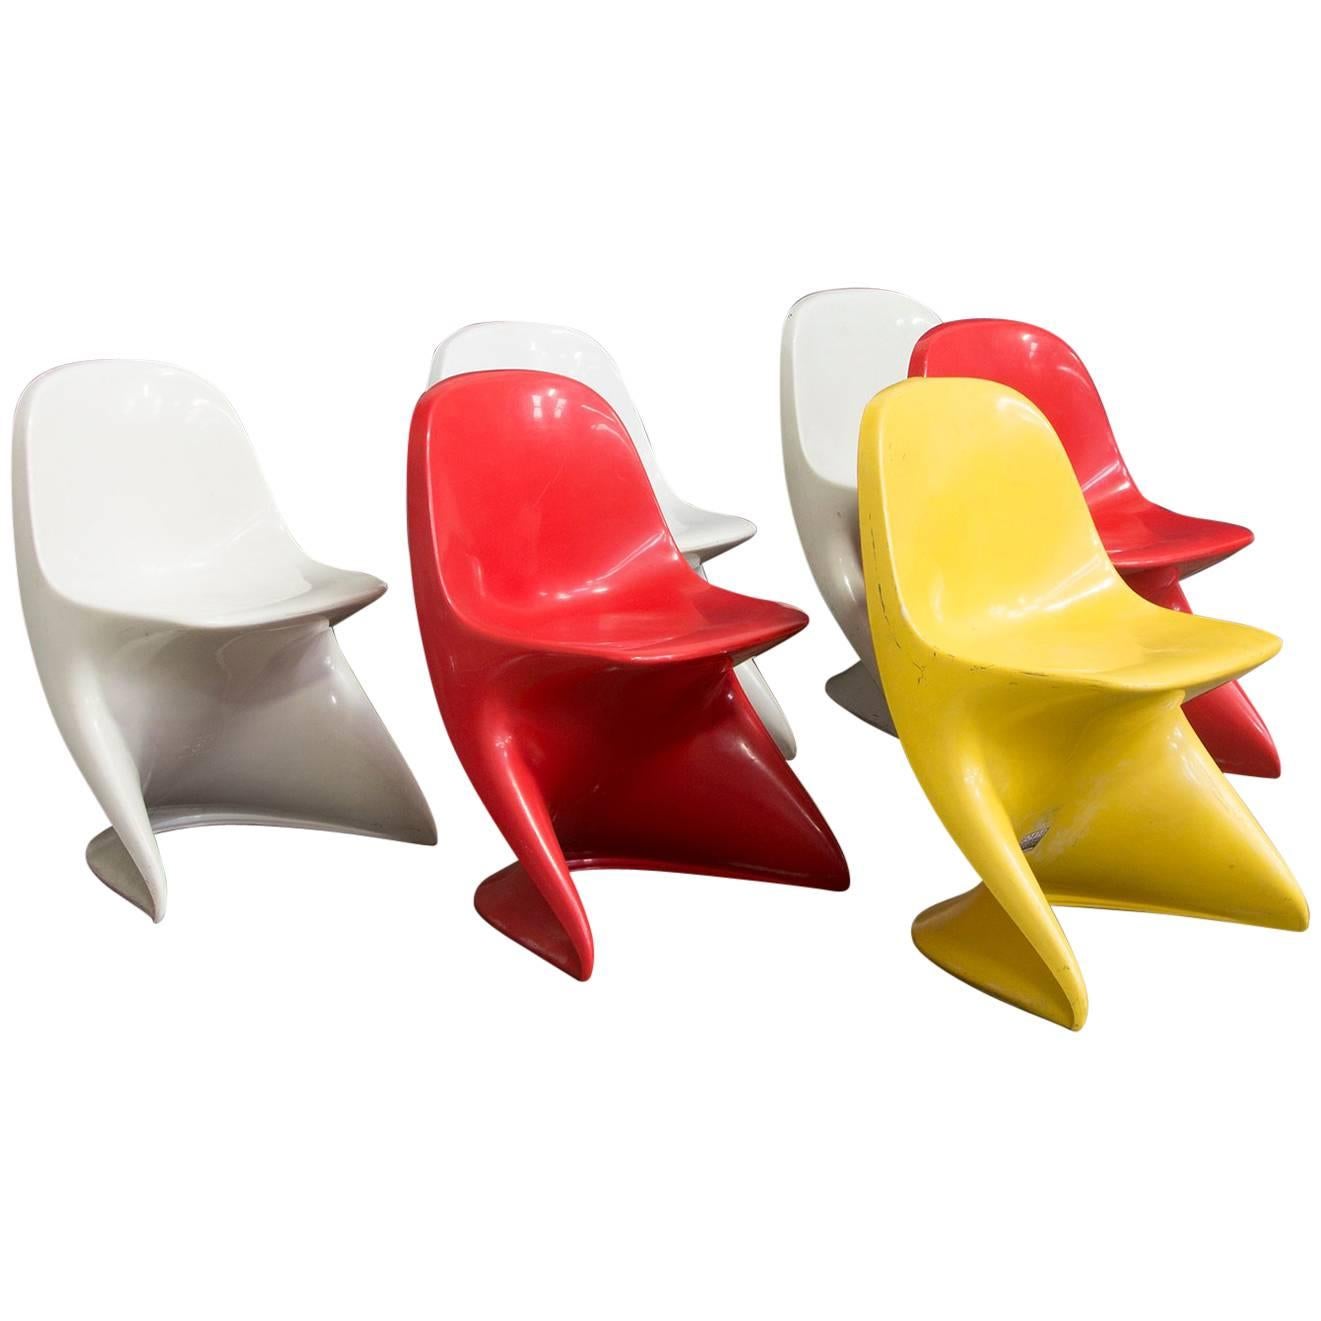 1977 Alexander Begge for Casala, Germany, Casalino Child Chairs For Sale